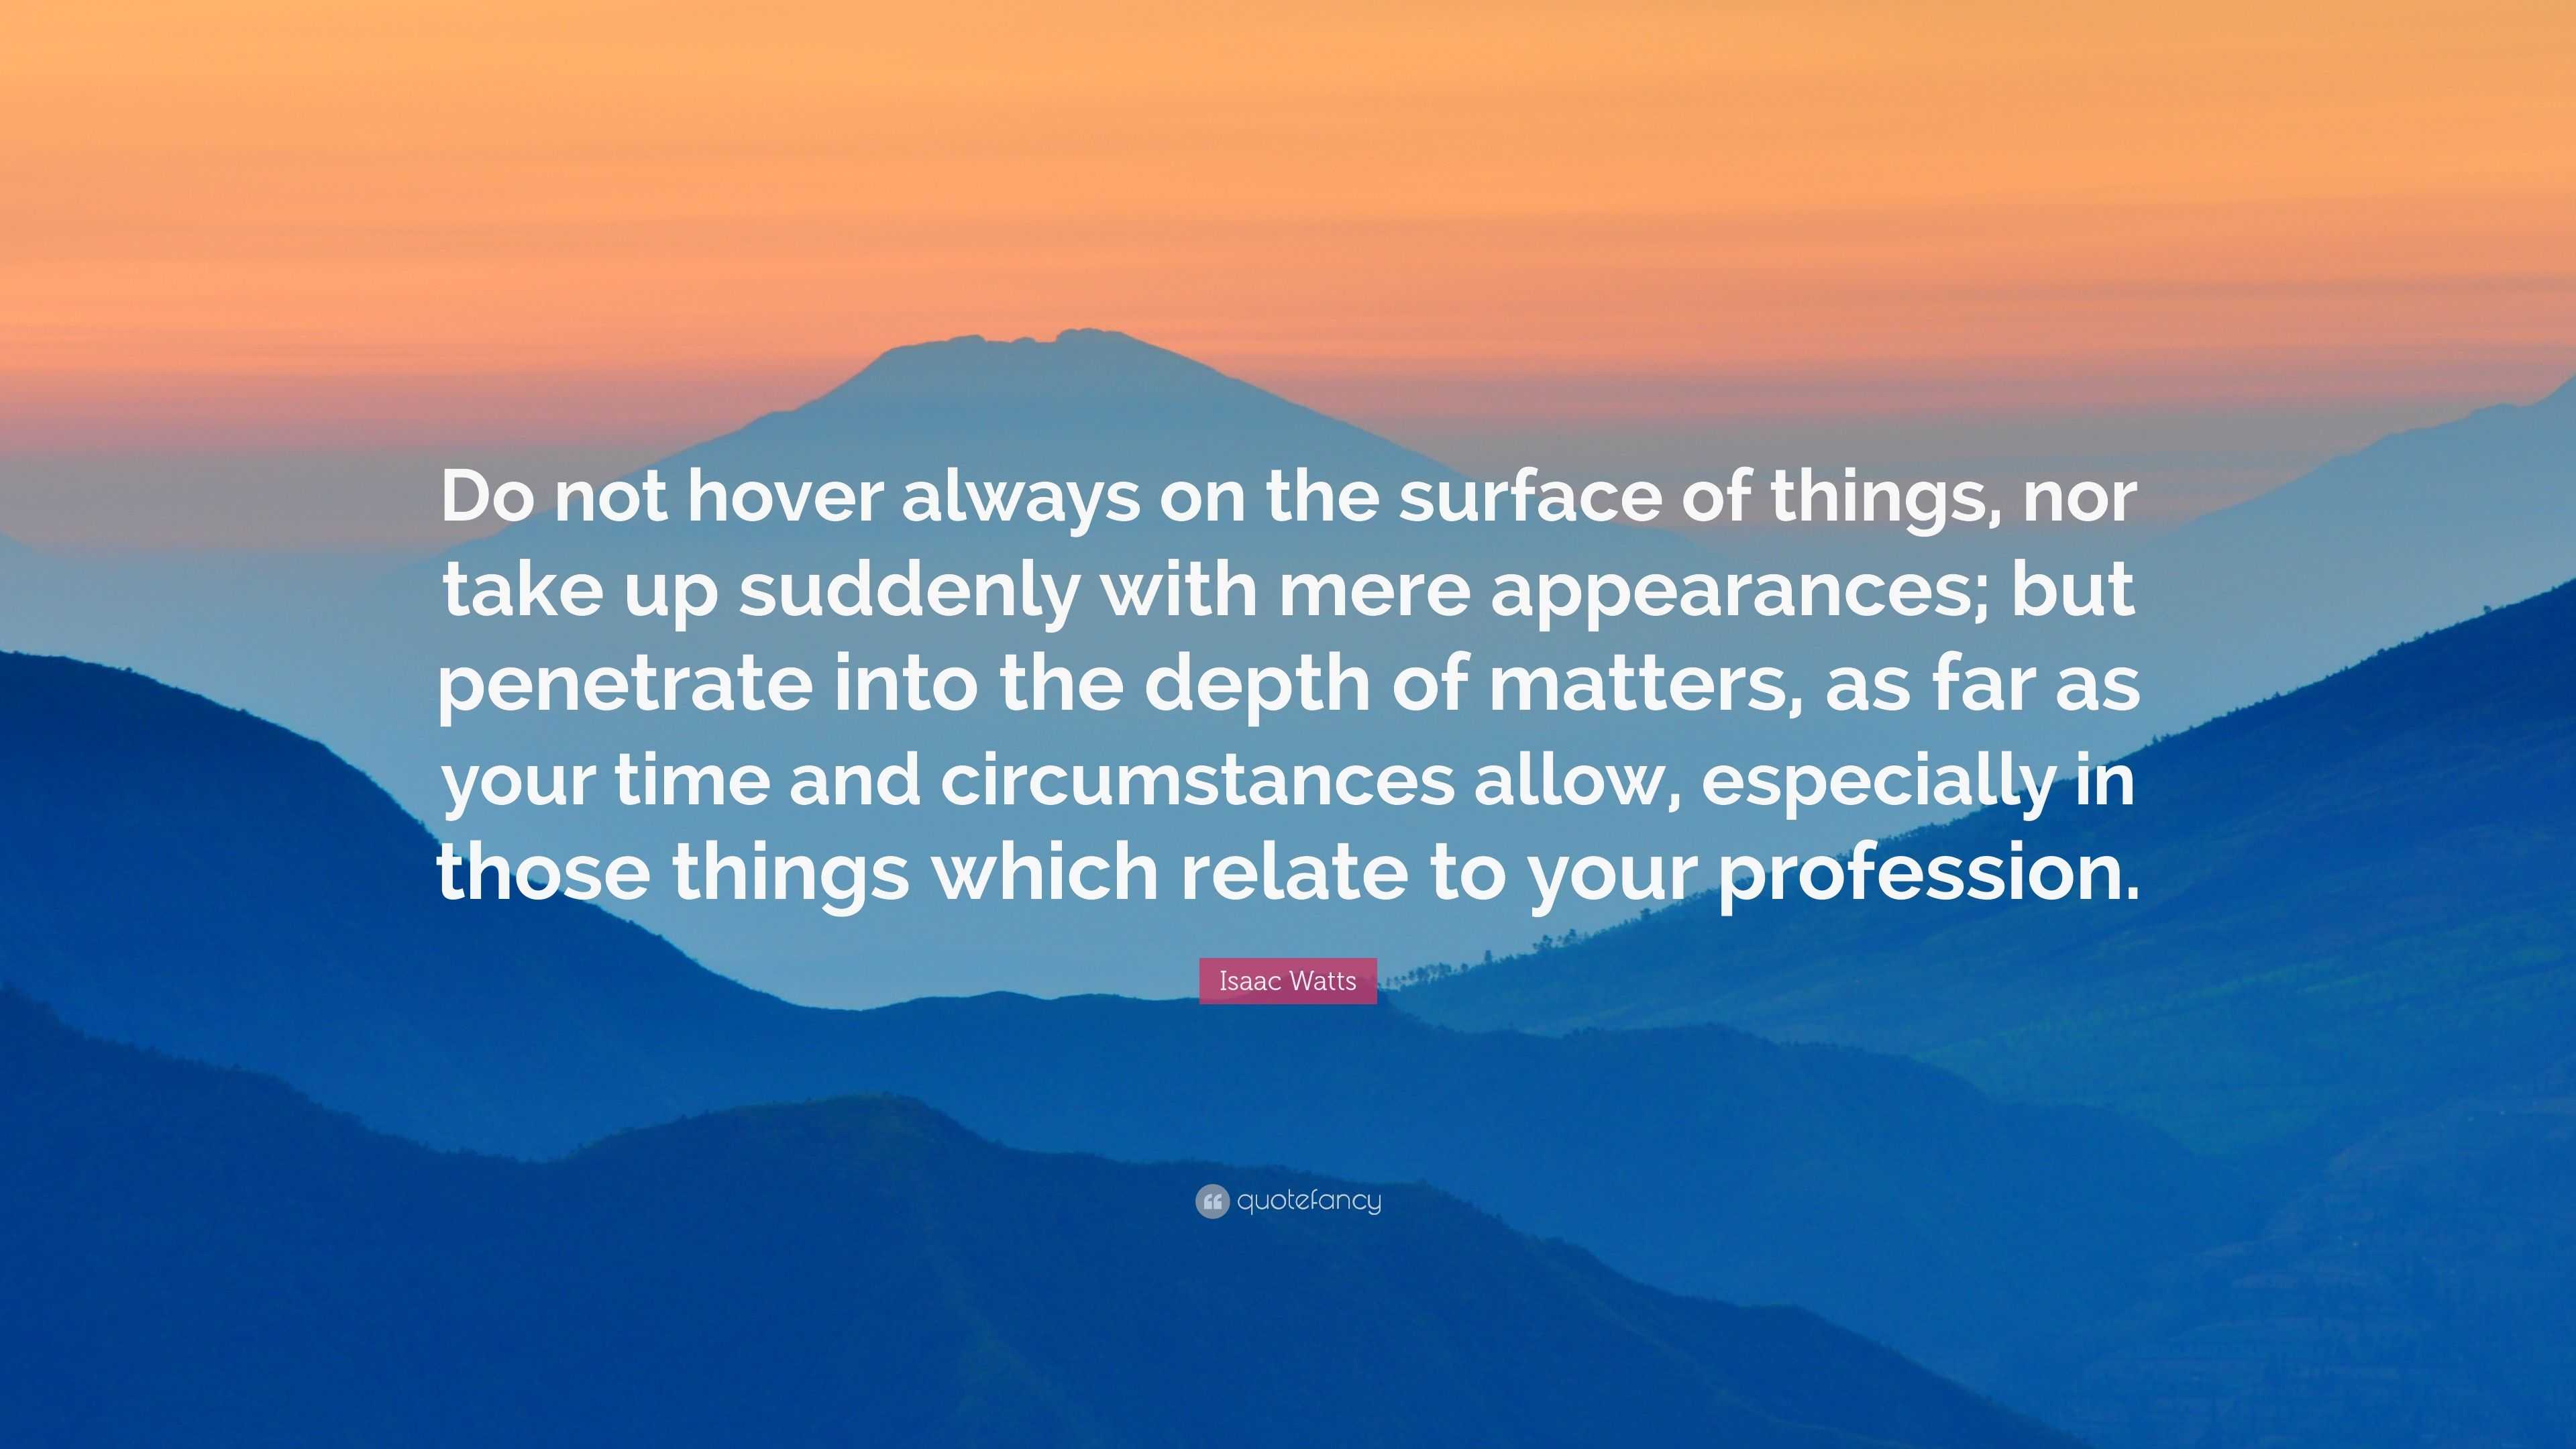 Isaac Watts Quote: “Do not hover always on the surface of things, nor ...